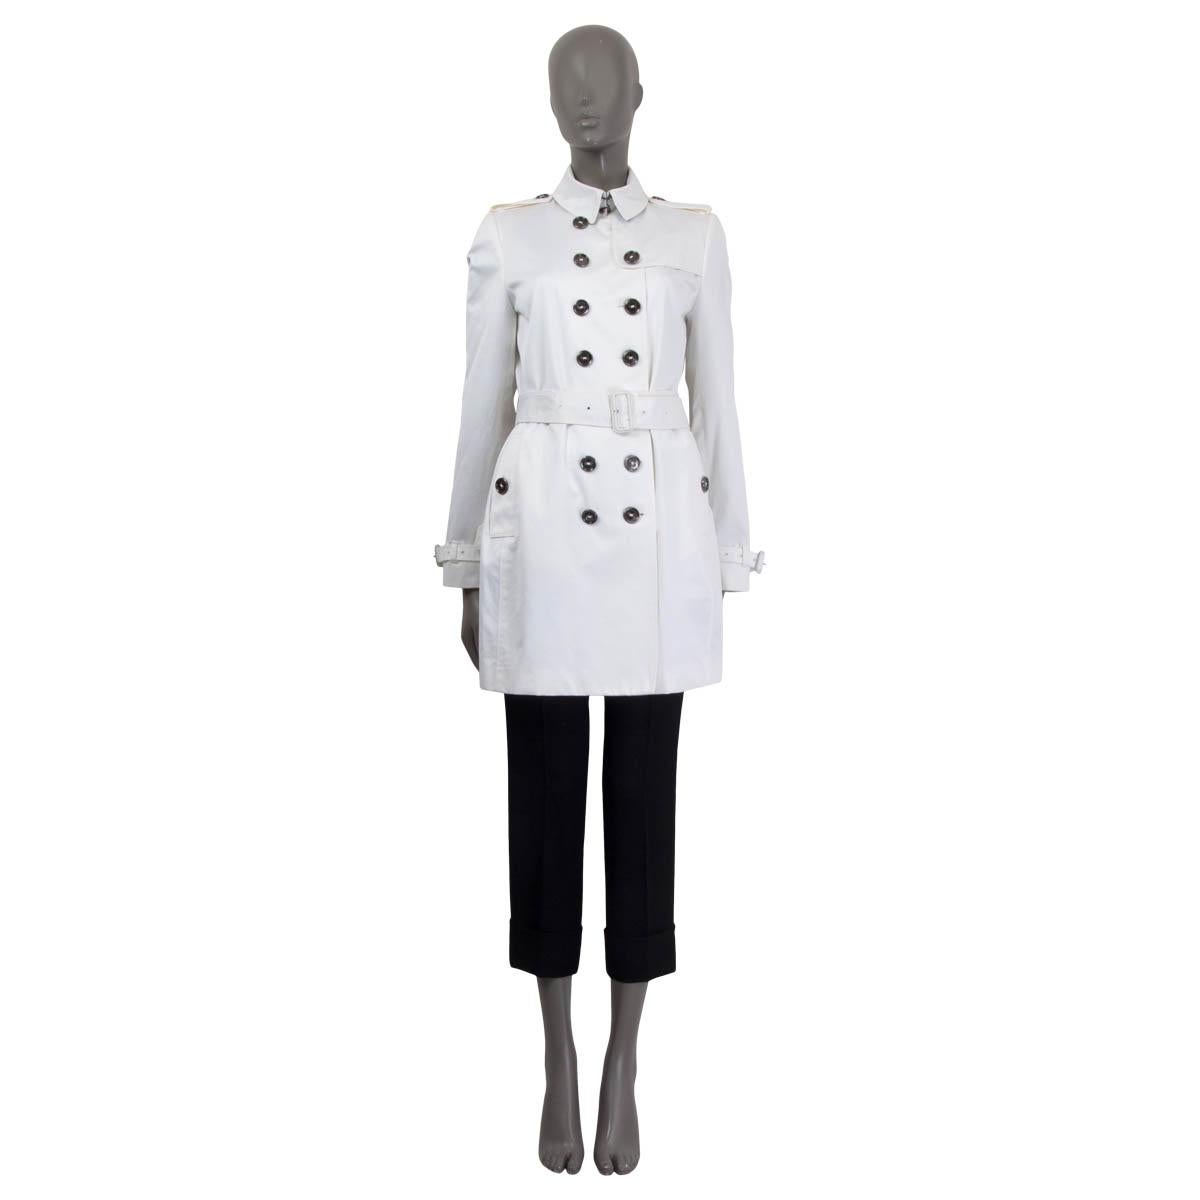 100% authentic Burberry London double-breasted short trench coat in white cotton (99%) and elastane (1%) with belted cuffs and shoulder epaulets. Closes with one hook at the neck, seven buttons on the front and a belt at the waist-line. Lined in